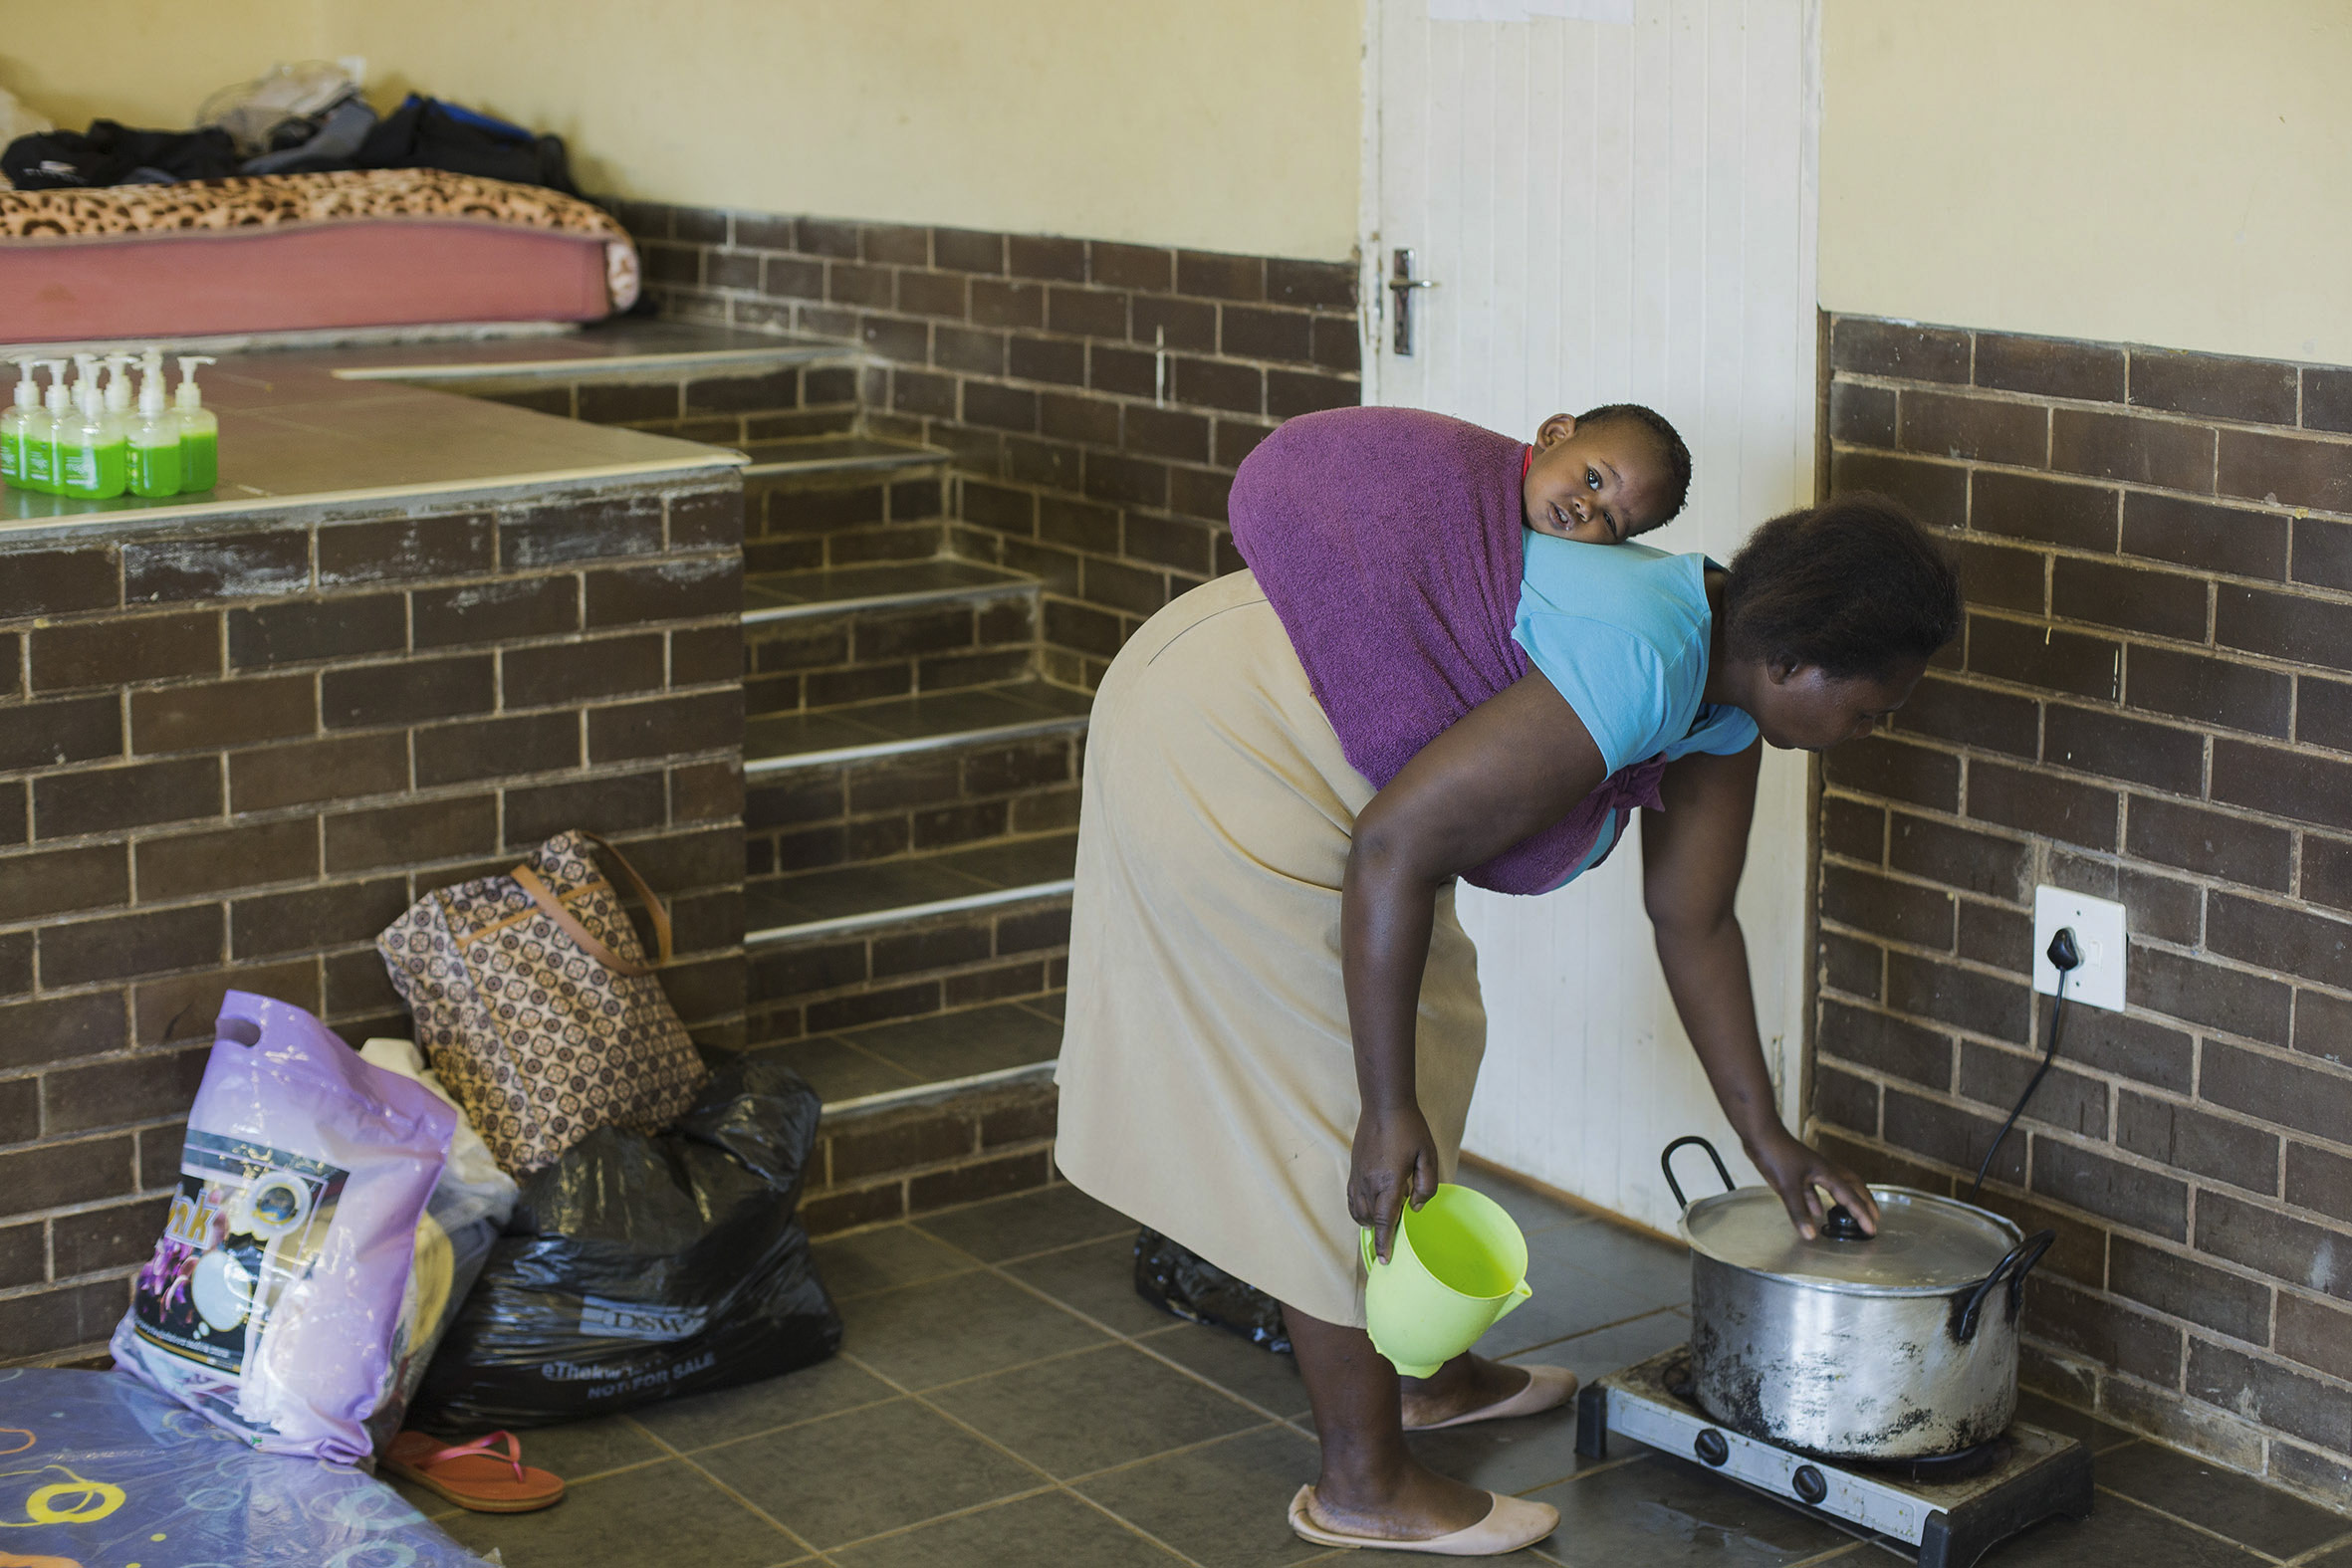 Flood victims - a woman carrying a baby on her back cooks steam bread at the community hall